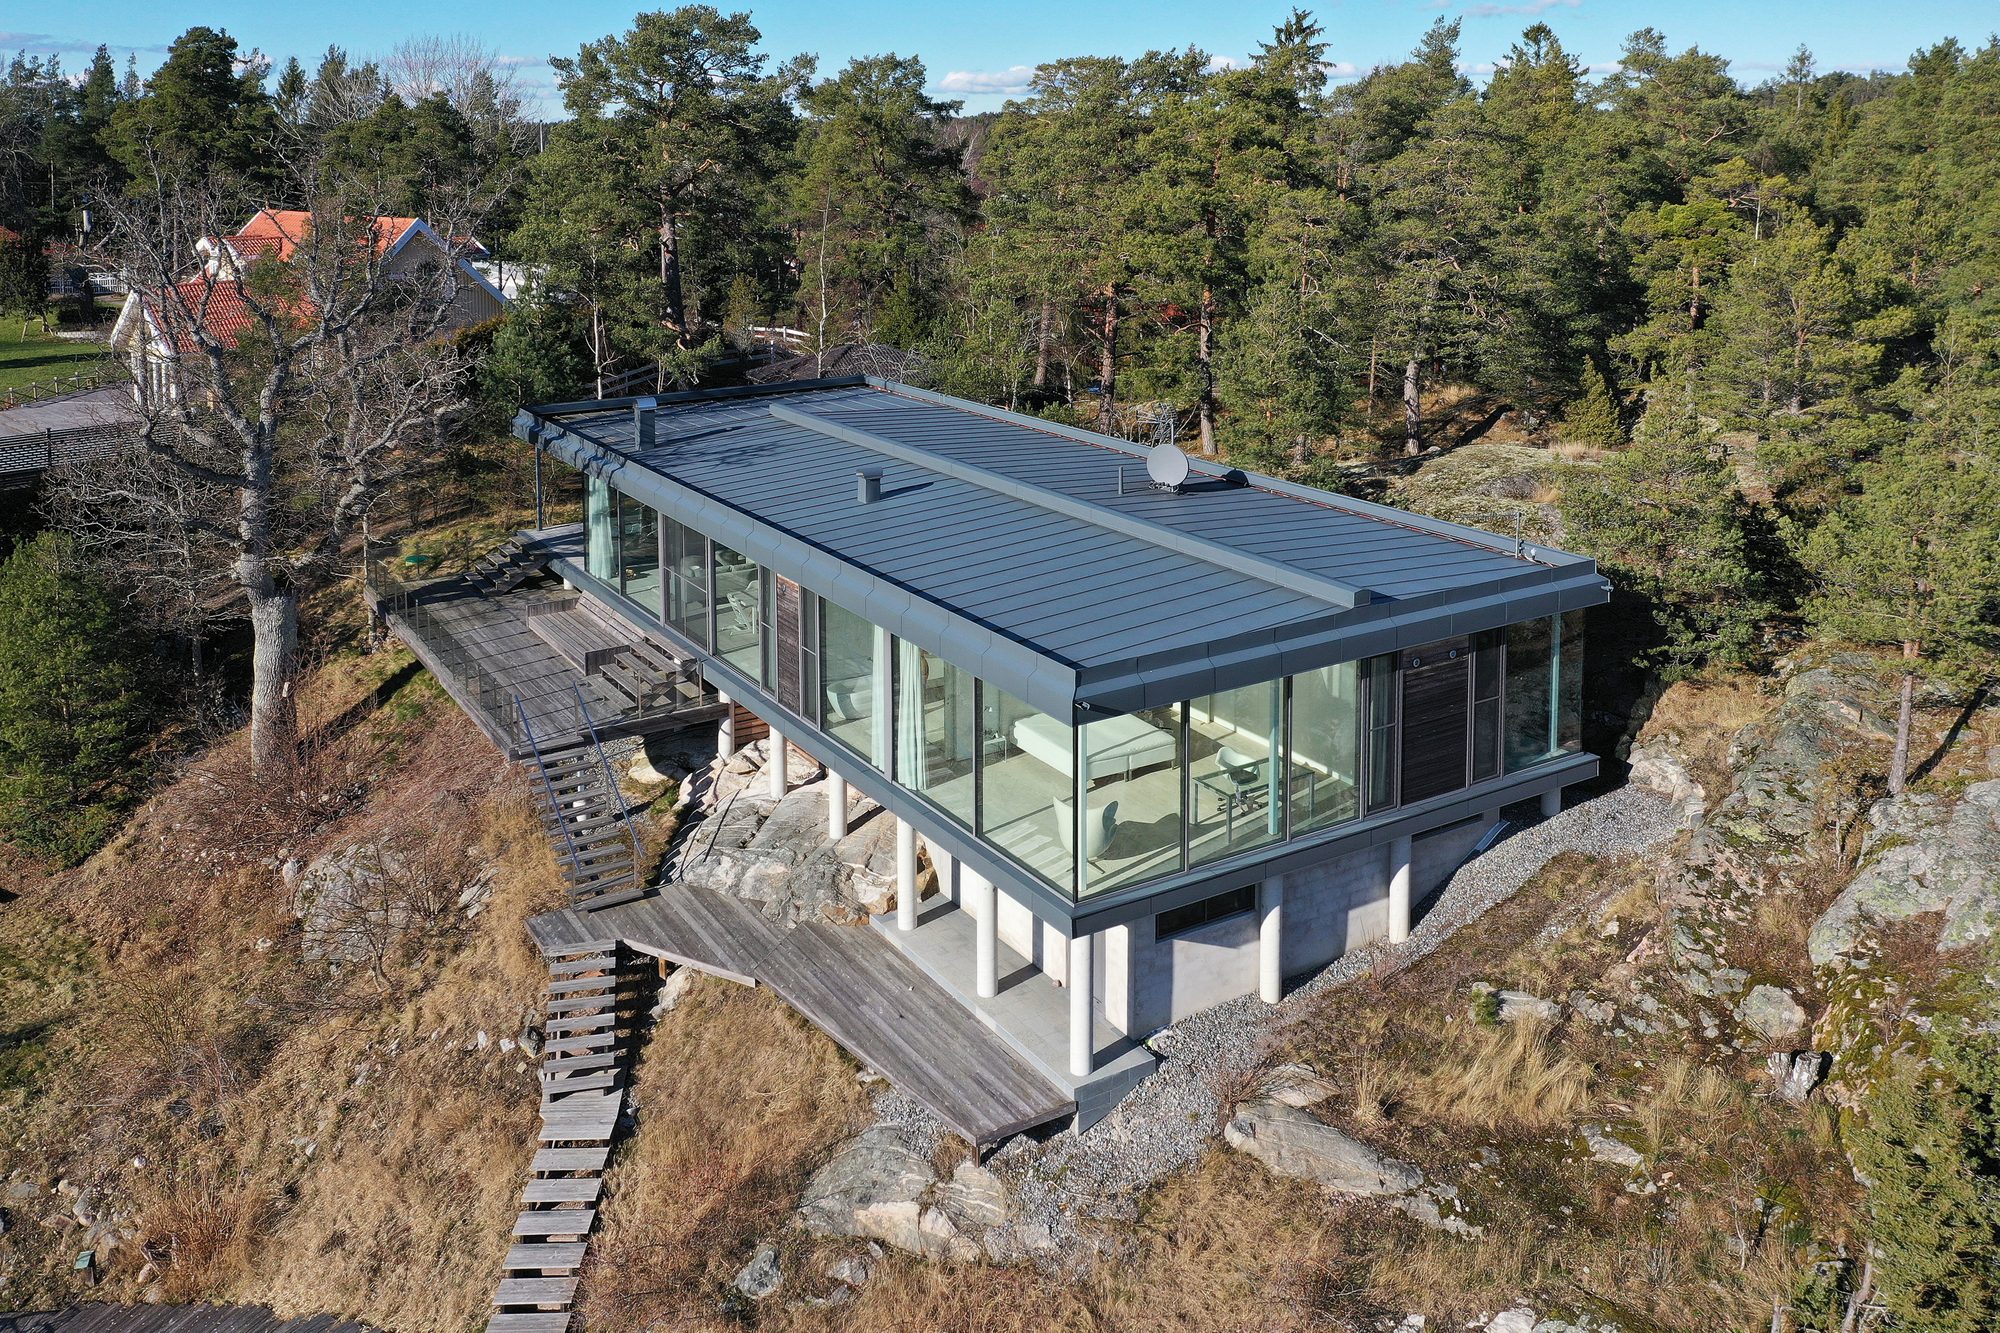 Modern metal and glass home built into the side of a rocky hill with wood decks.